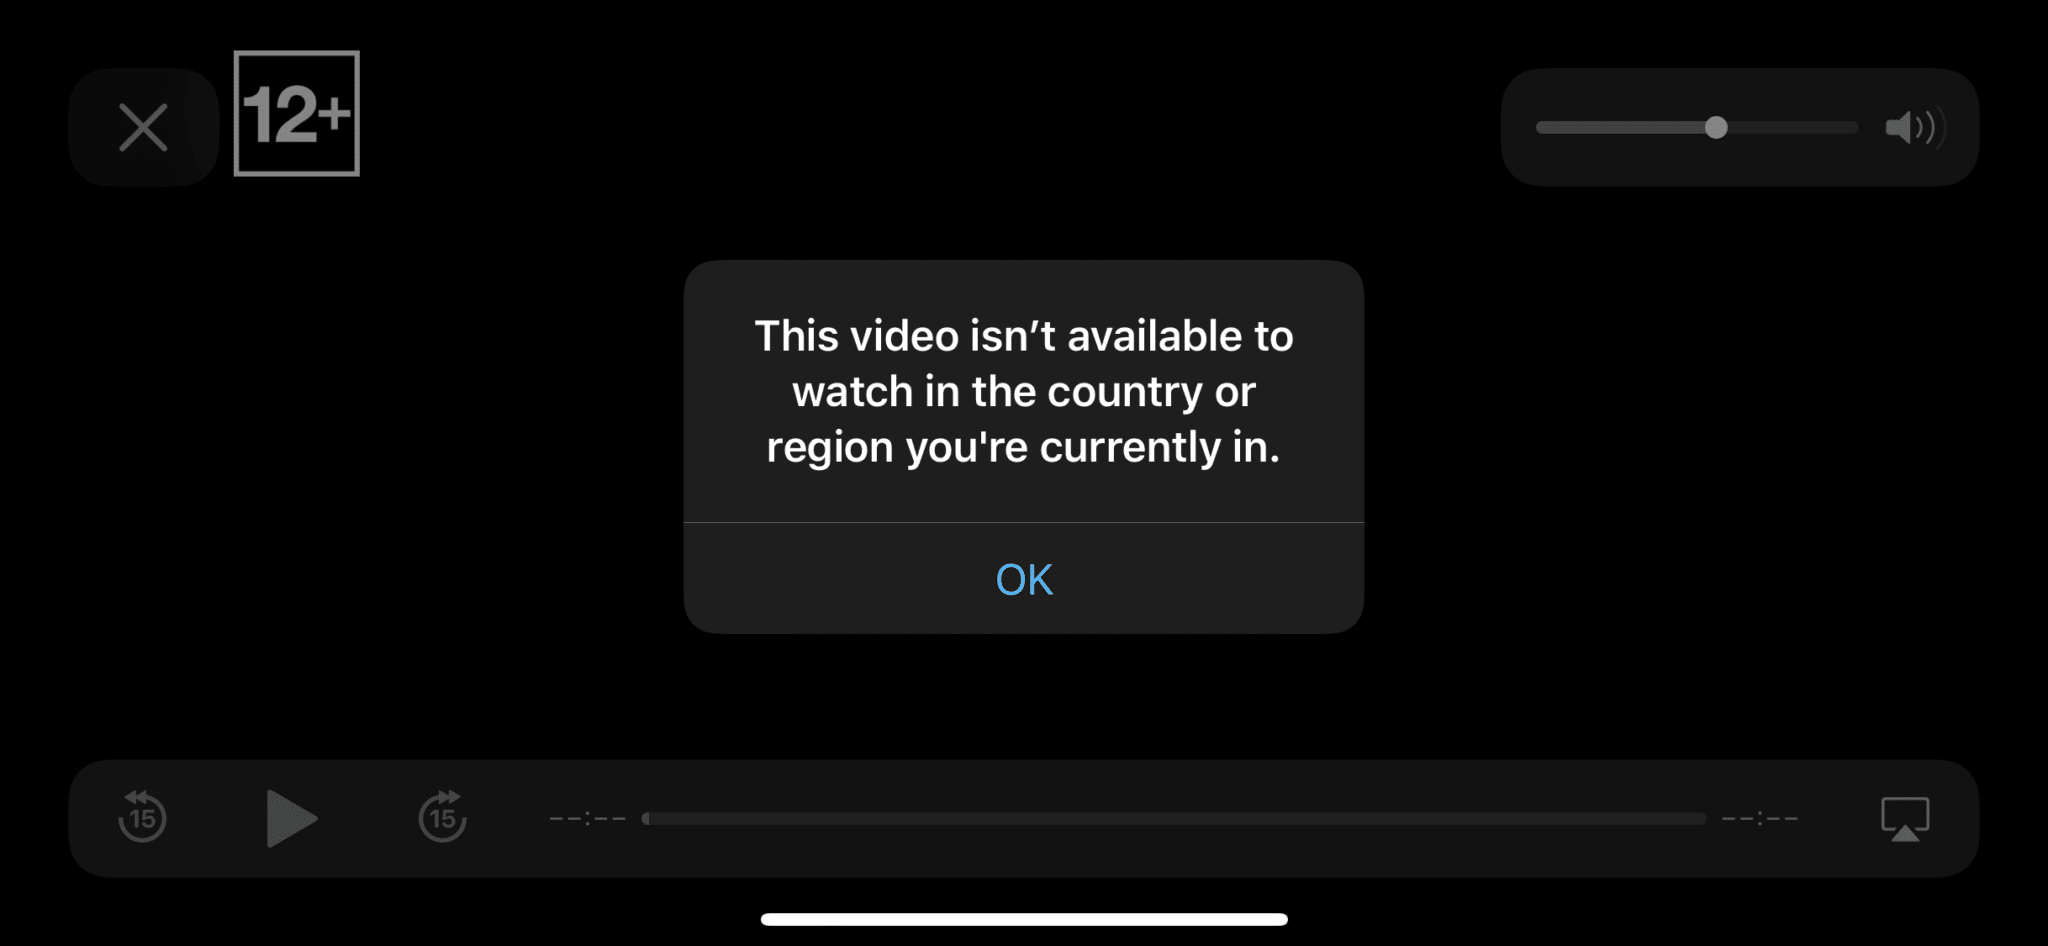 Apple TV+ This video isn't available to watch in the country or region you're currently in error message